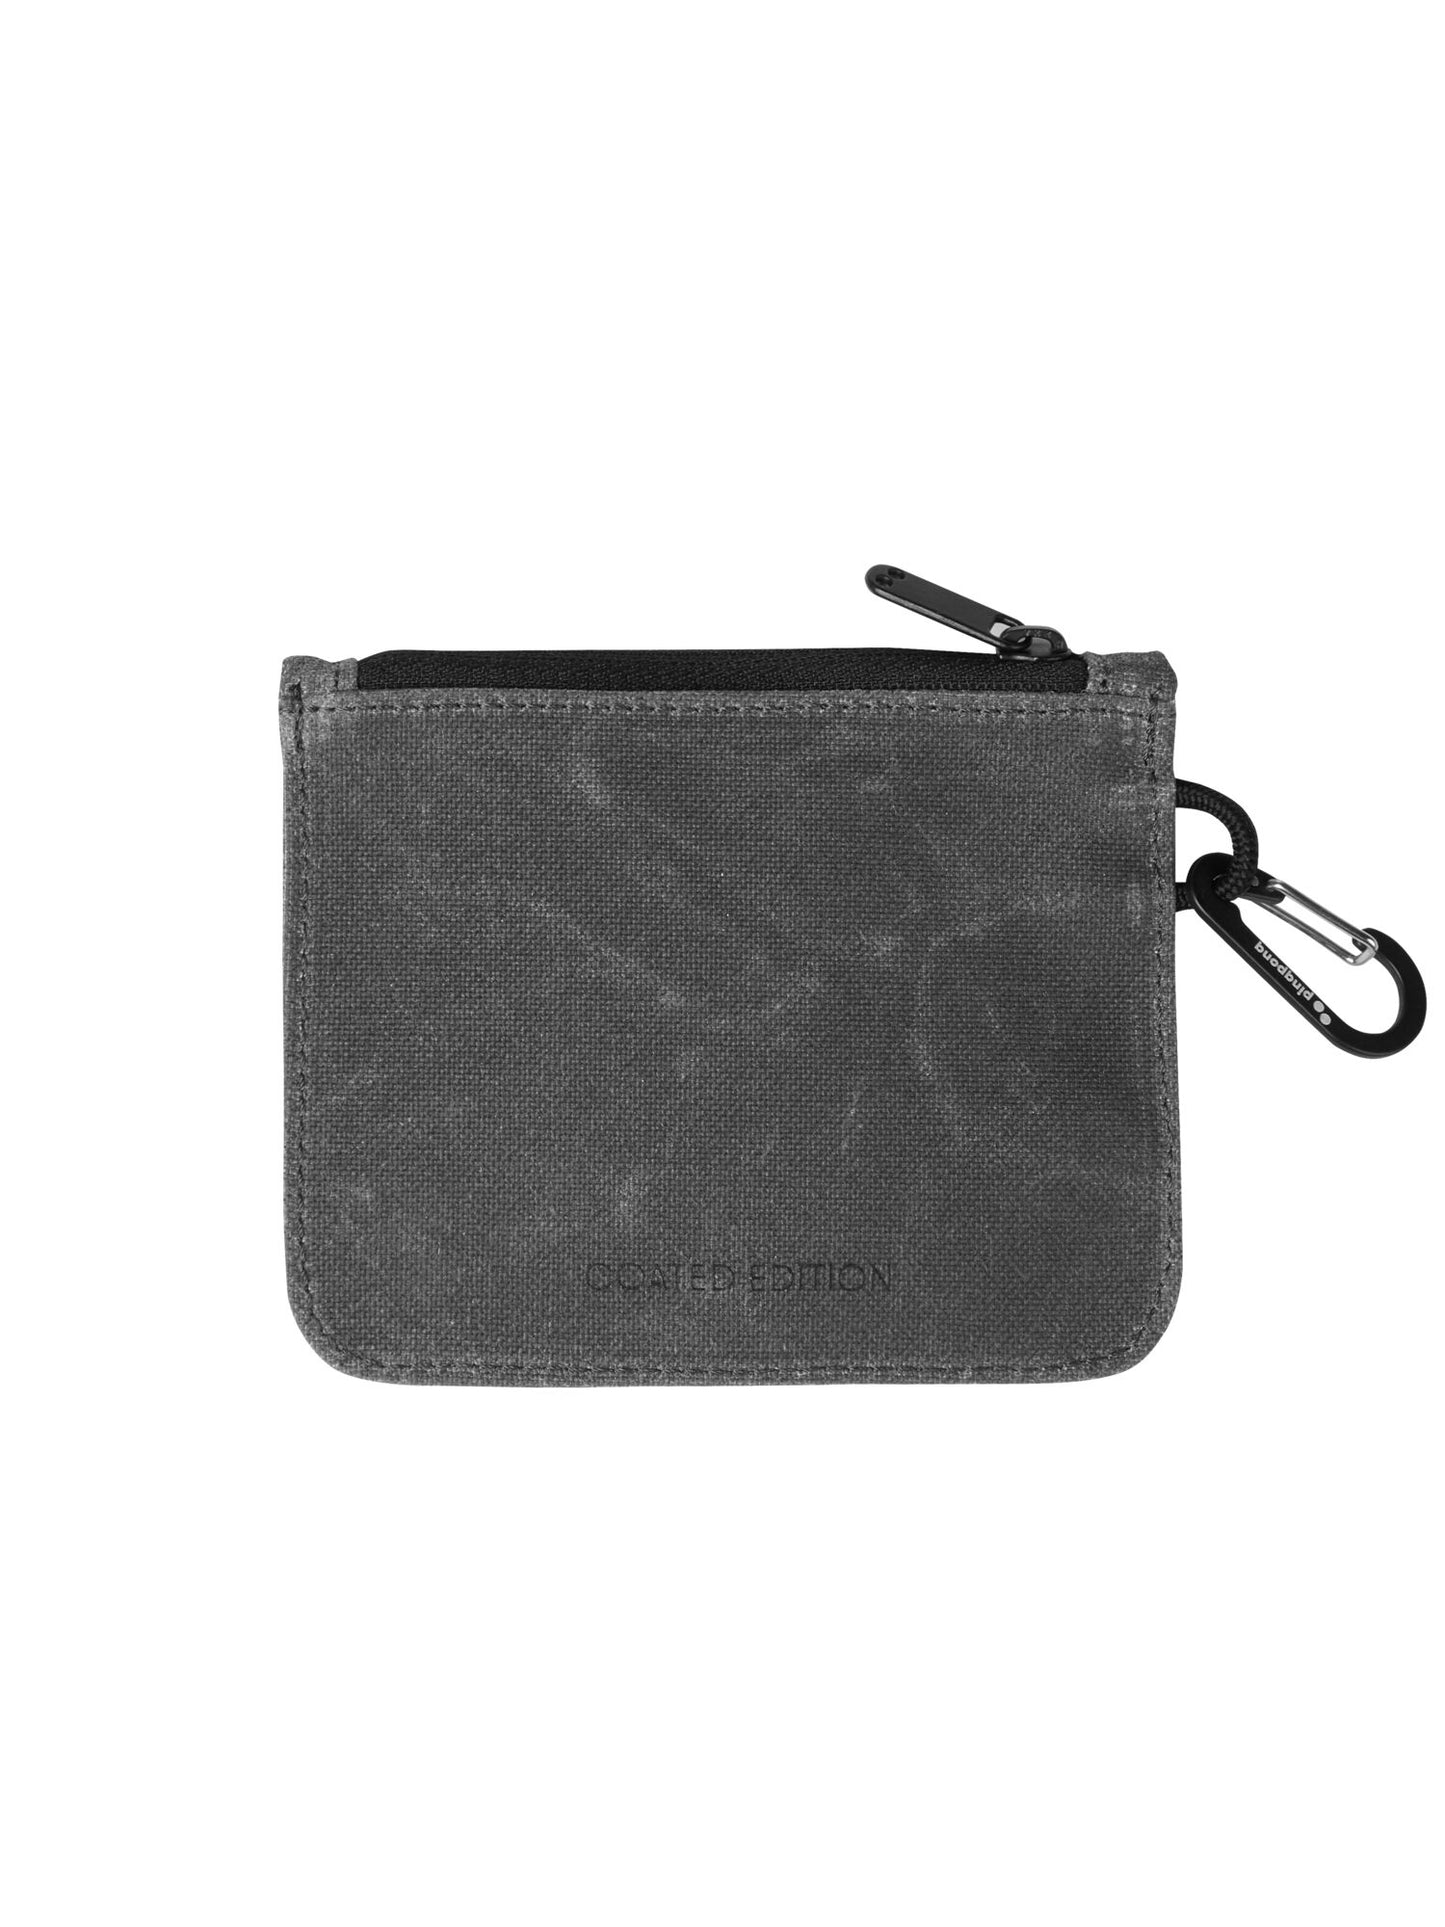 pinqponq-Coated-anthracite-wallet-back